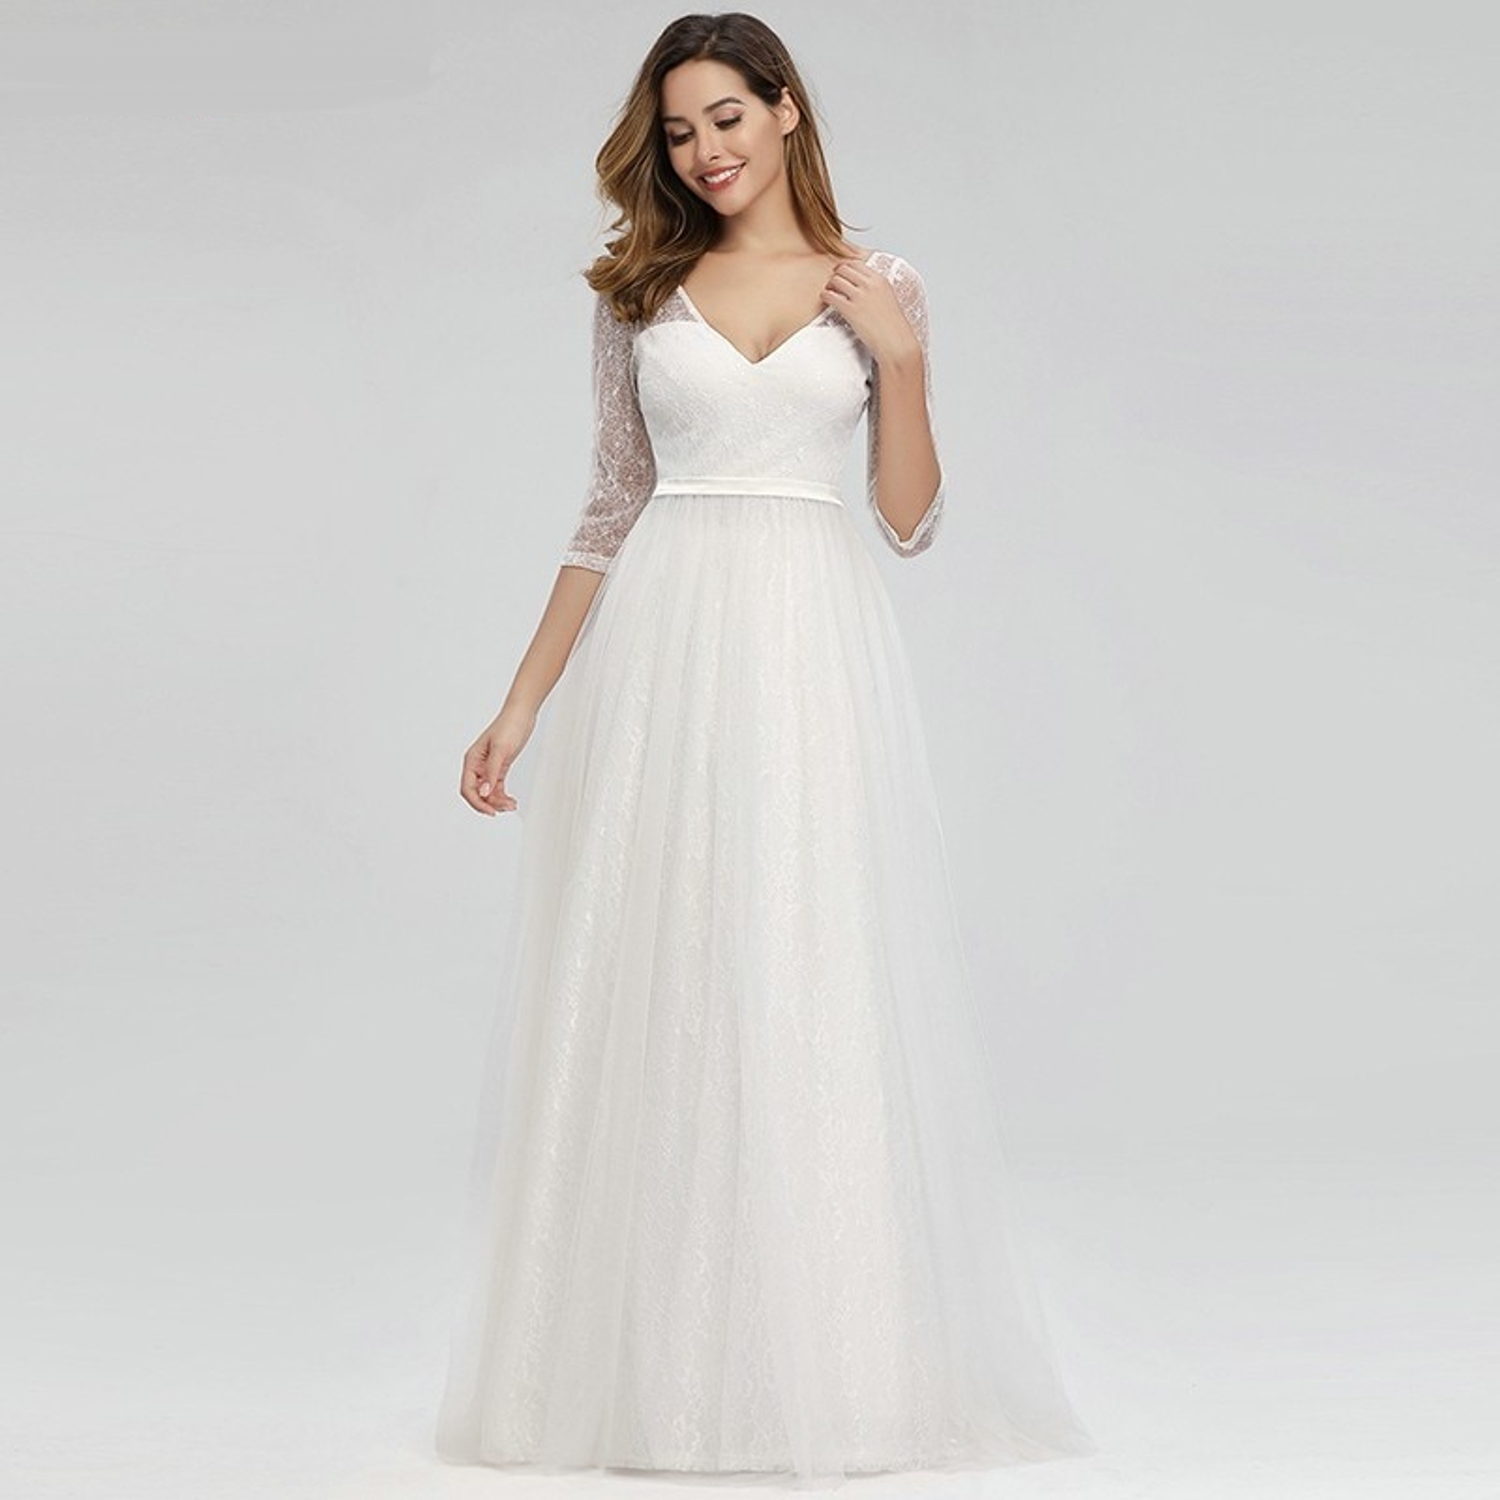 A-line wedding dress with sleeves